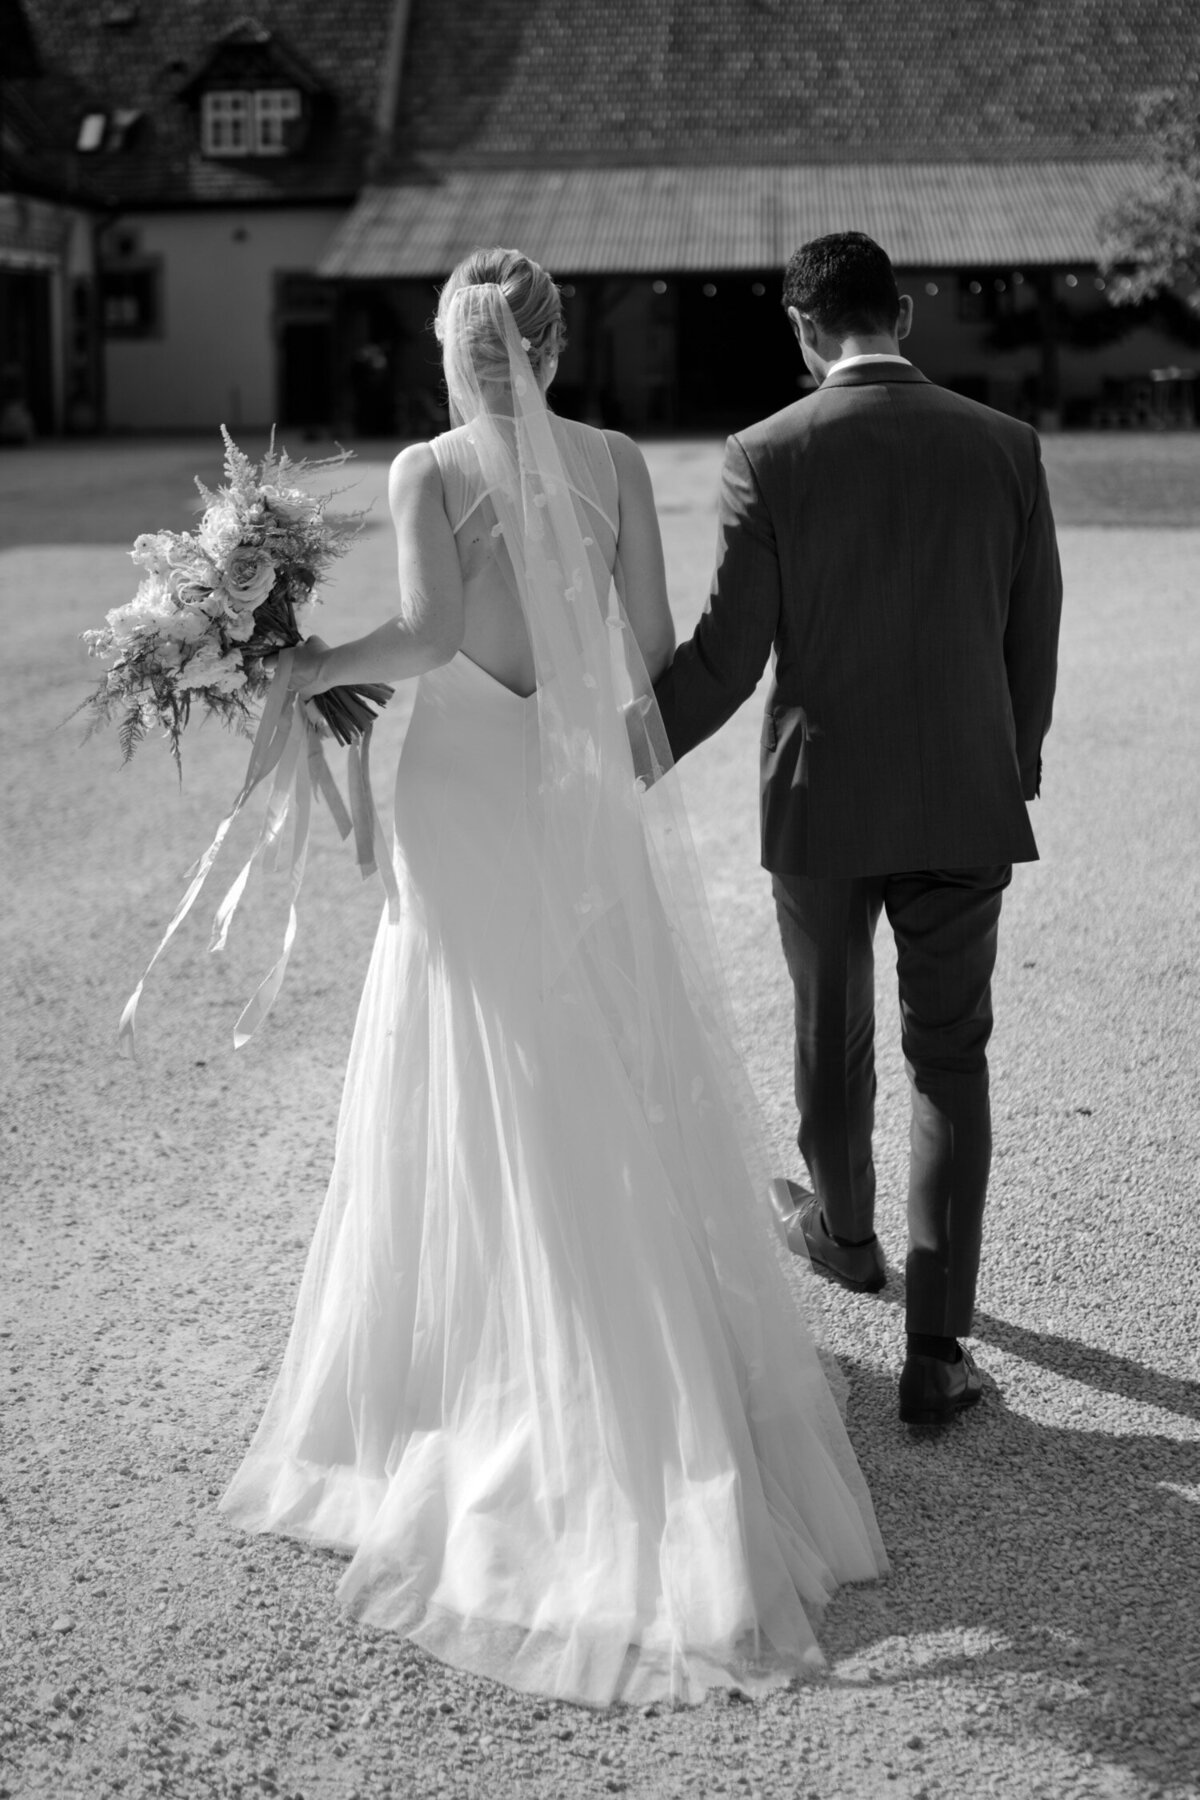 080_Flora_And_Grace_Europe_Destination_Wedding_Photographer-240_Elegant and whimsical destination wedding in Europe captured by editorial wedding photographer Flora and Grace.